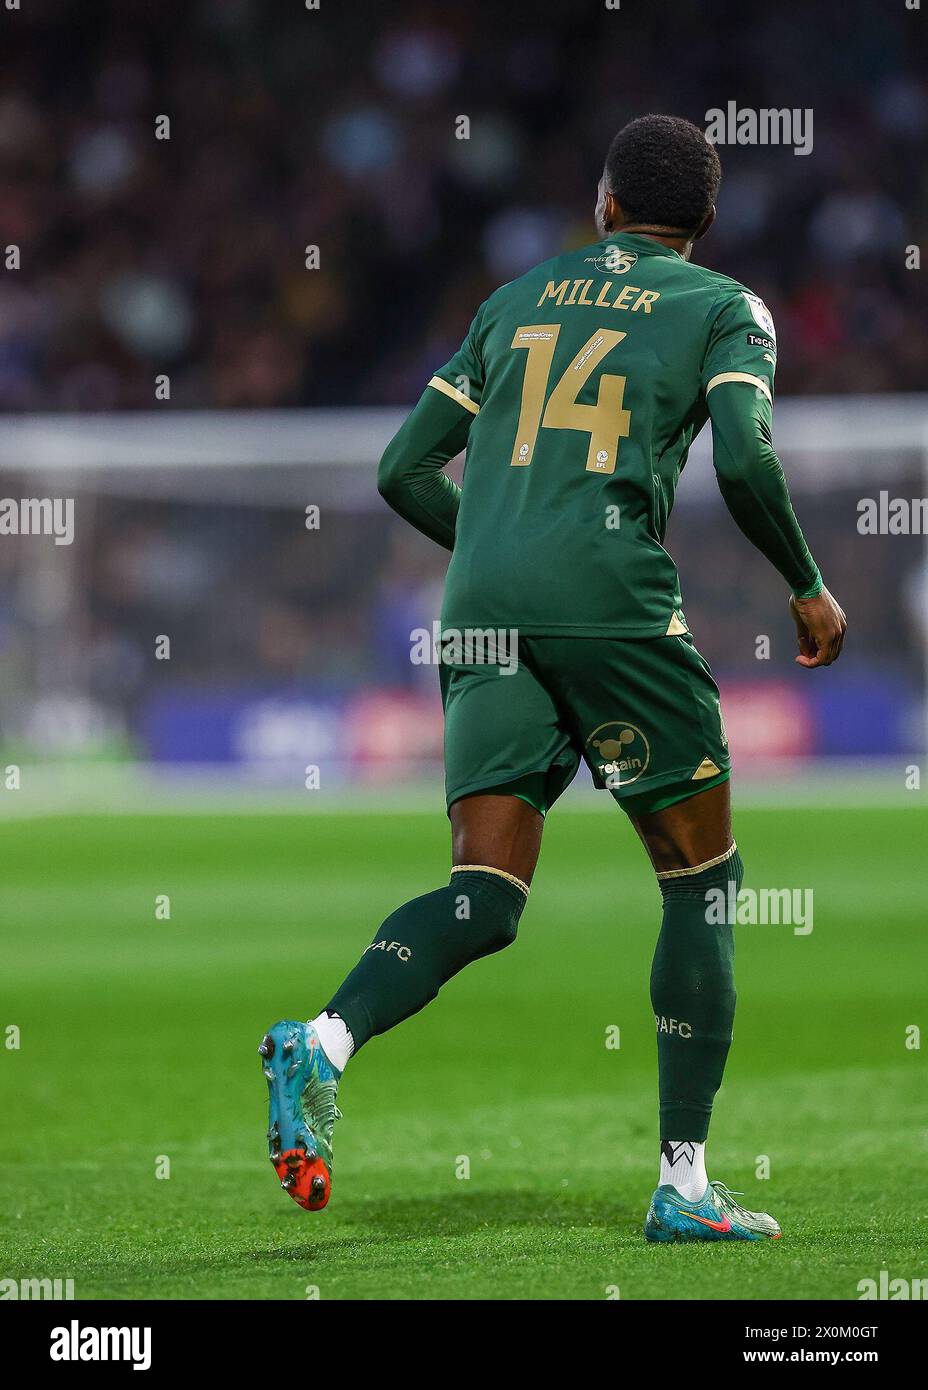 Mickel Miller of Plymouth Argyle in action during the Sky Bet Championship match Plymouth Argyle vs Leicester City at Home Park, Plymouth, United Kingdom, 12th April 2024 (Photo by Stan Kasala/News Images) in, on 4/12/2024. (Photo by Stan Kasala/News Images/Sipa USA) Credit: Sipa USA/Alamy Live News Stock Photo